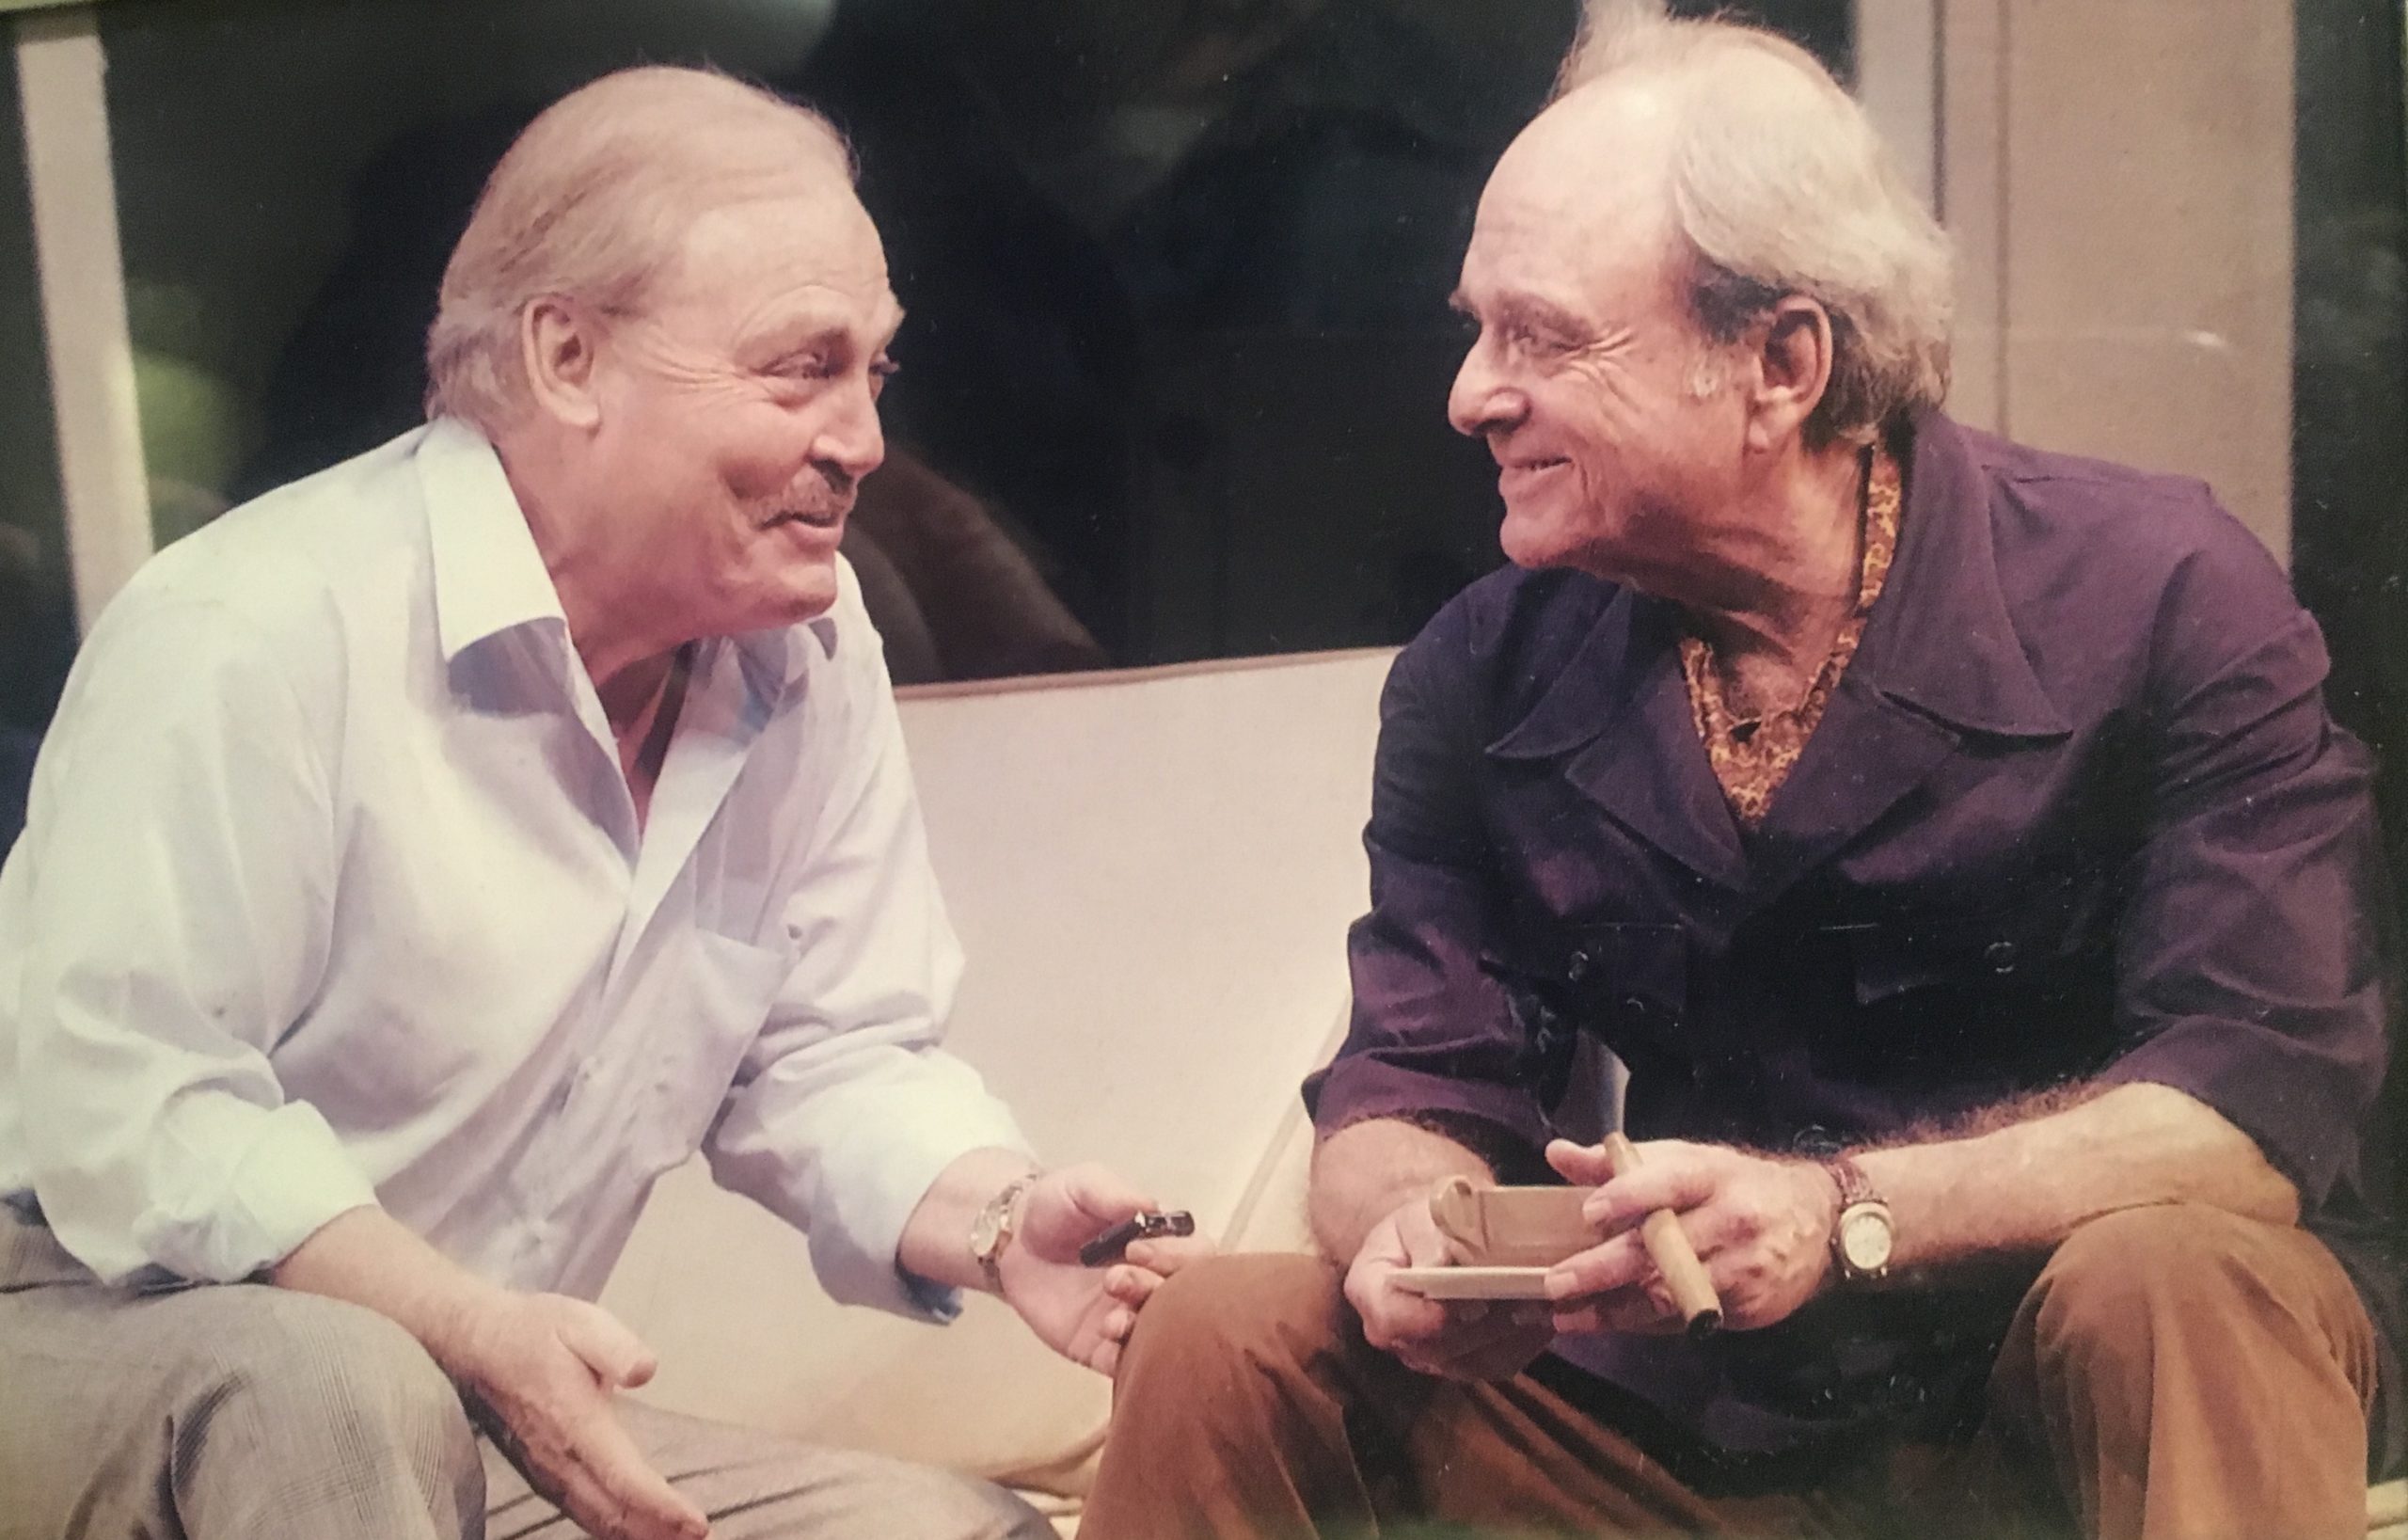 Actors and longtime friends Stacy Keach and Harris Yulin.